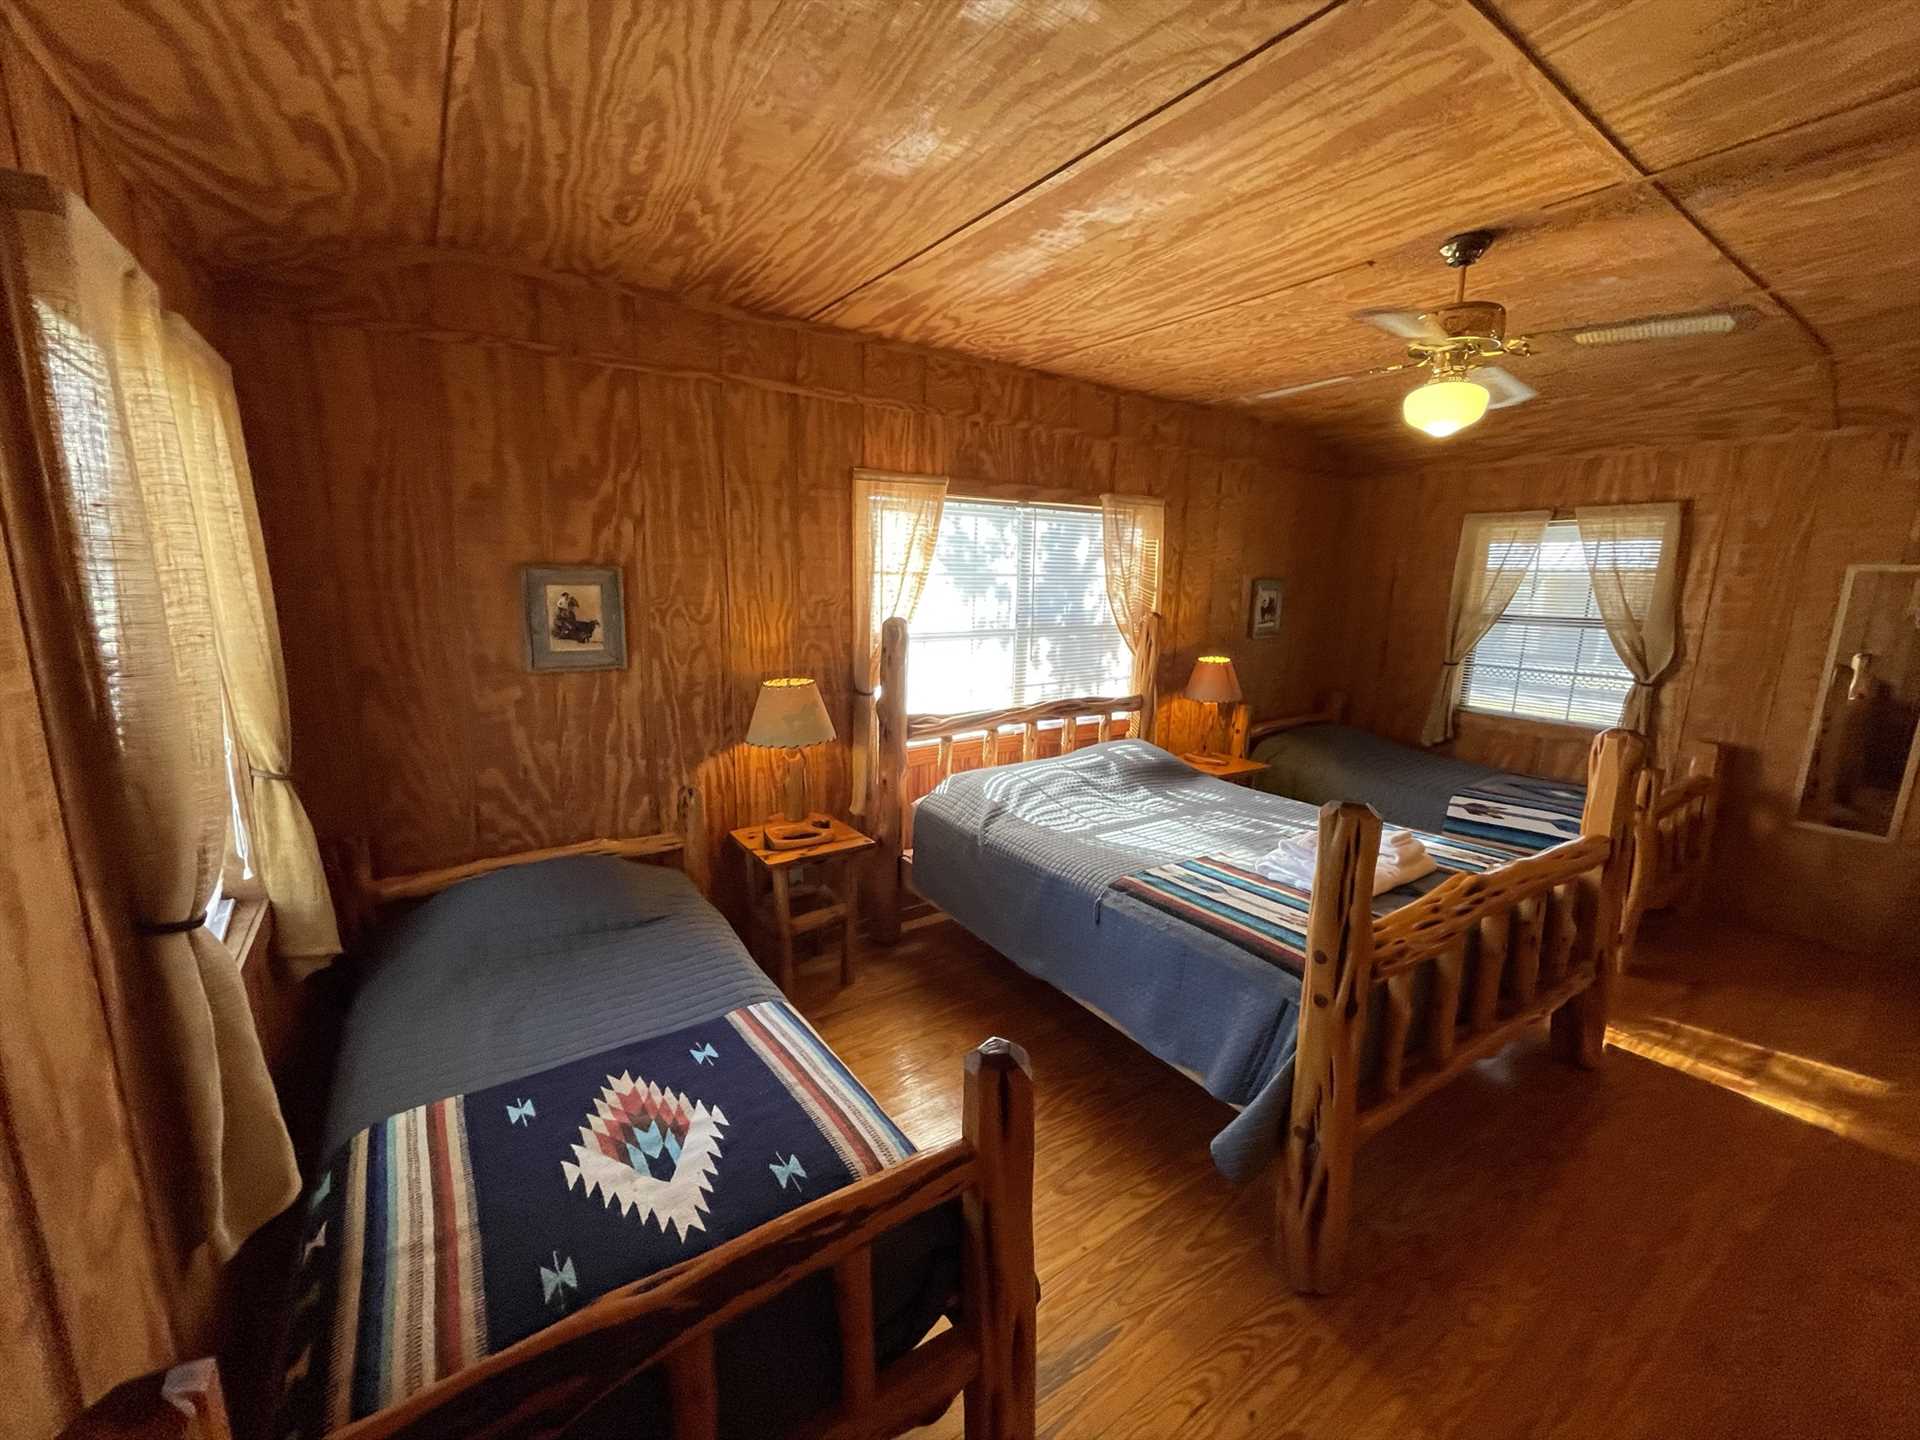                                                 With a queen and three twin-sized beds here, there's sweet slumber accommodations for up to five of your folks.